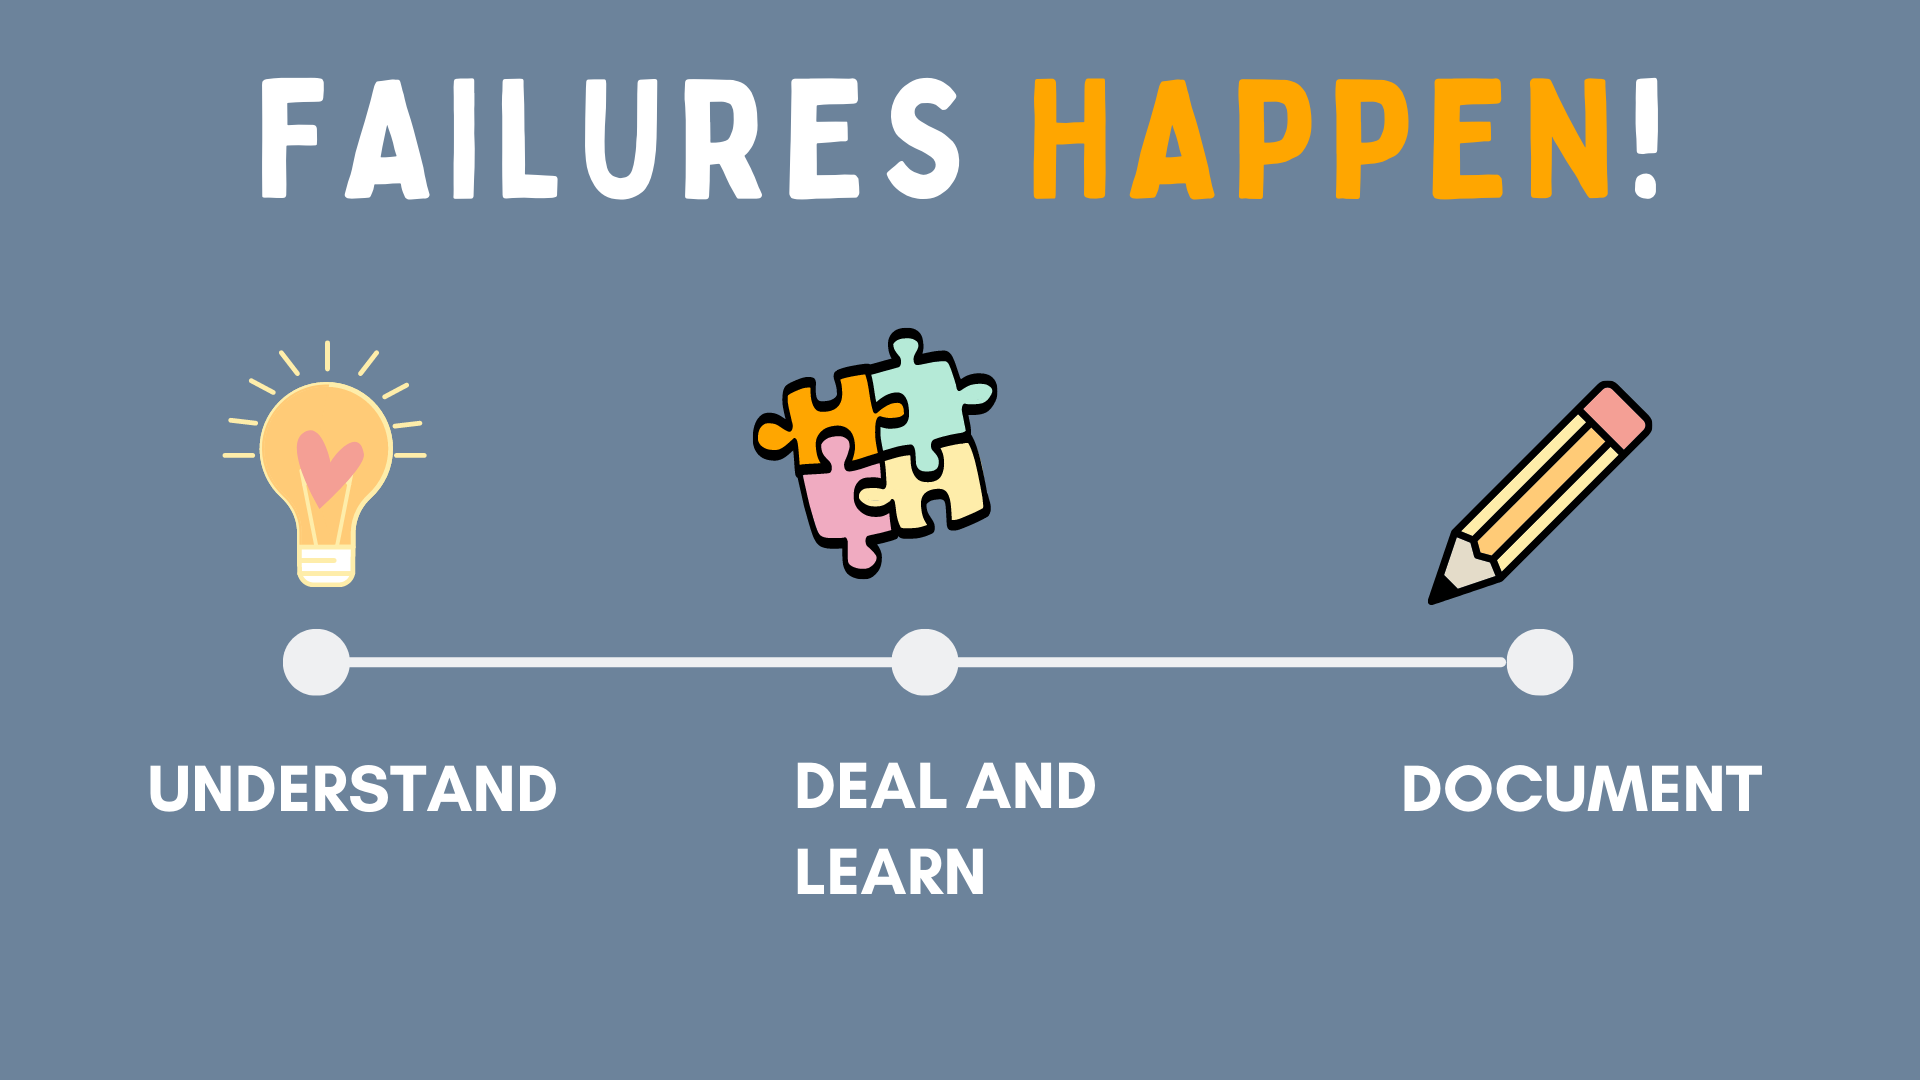 A slide with the title 'failures happen' and 3 steps: understand, deal and learn, document